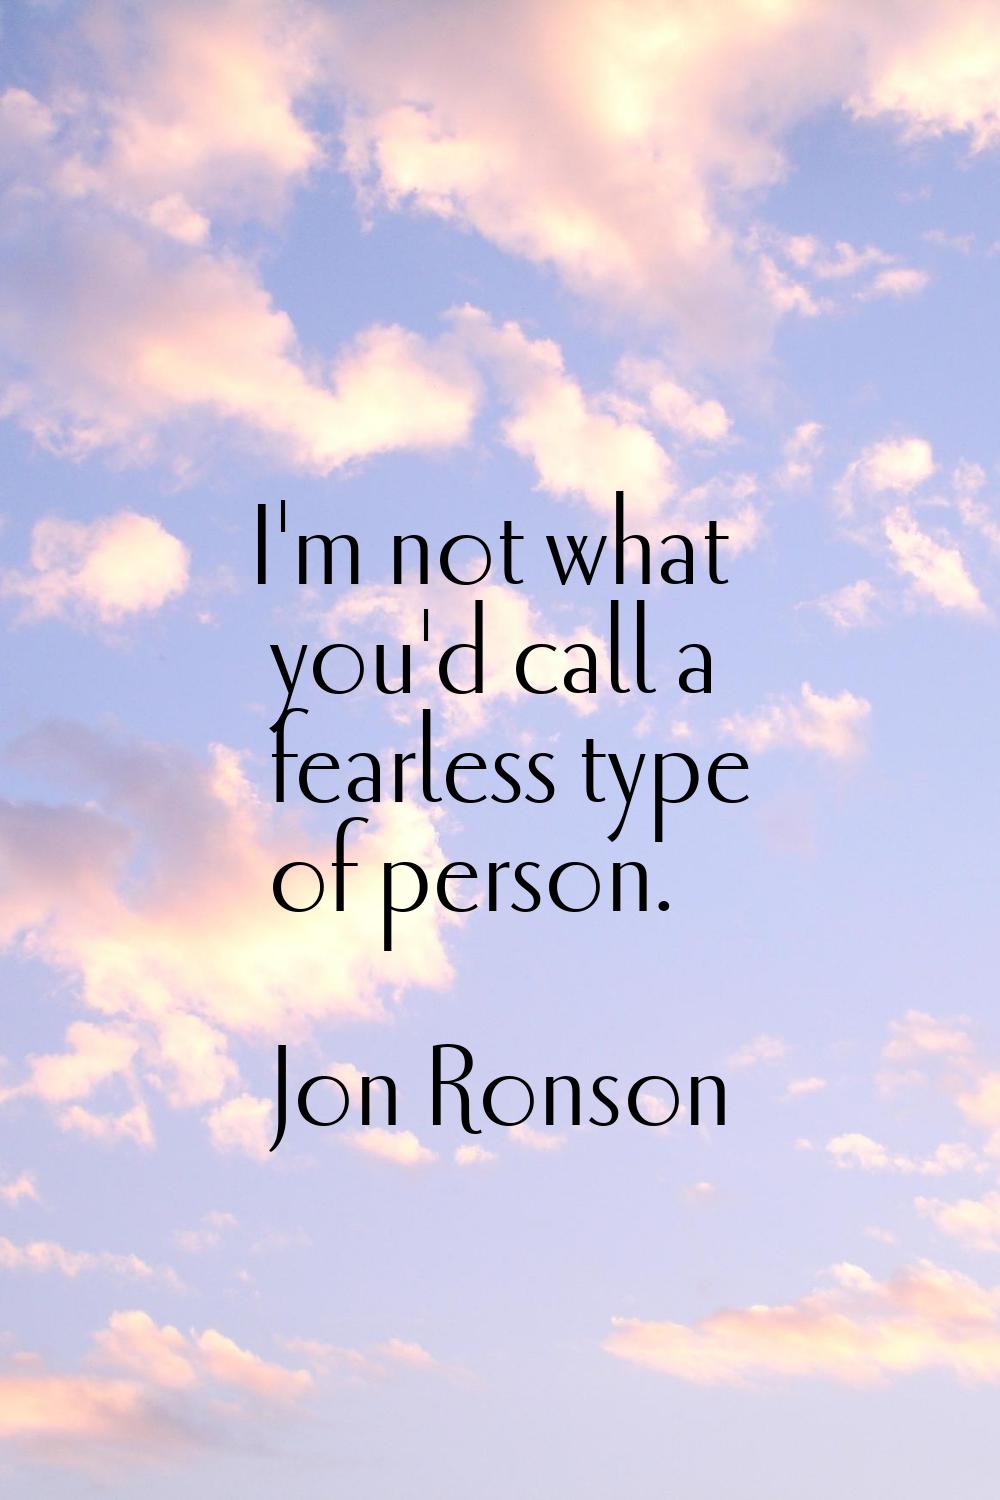 I'm not what you'd call a fearless type of person.